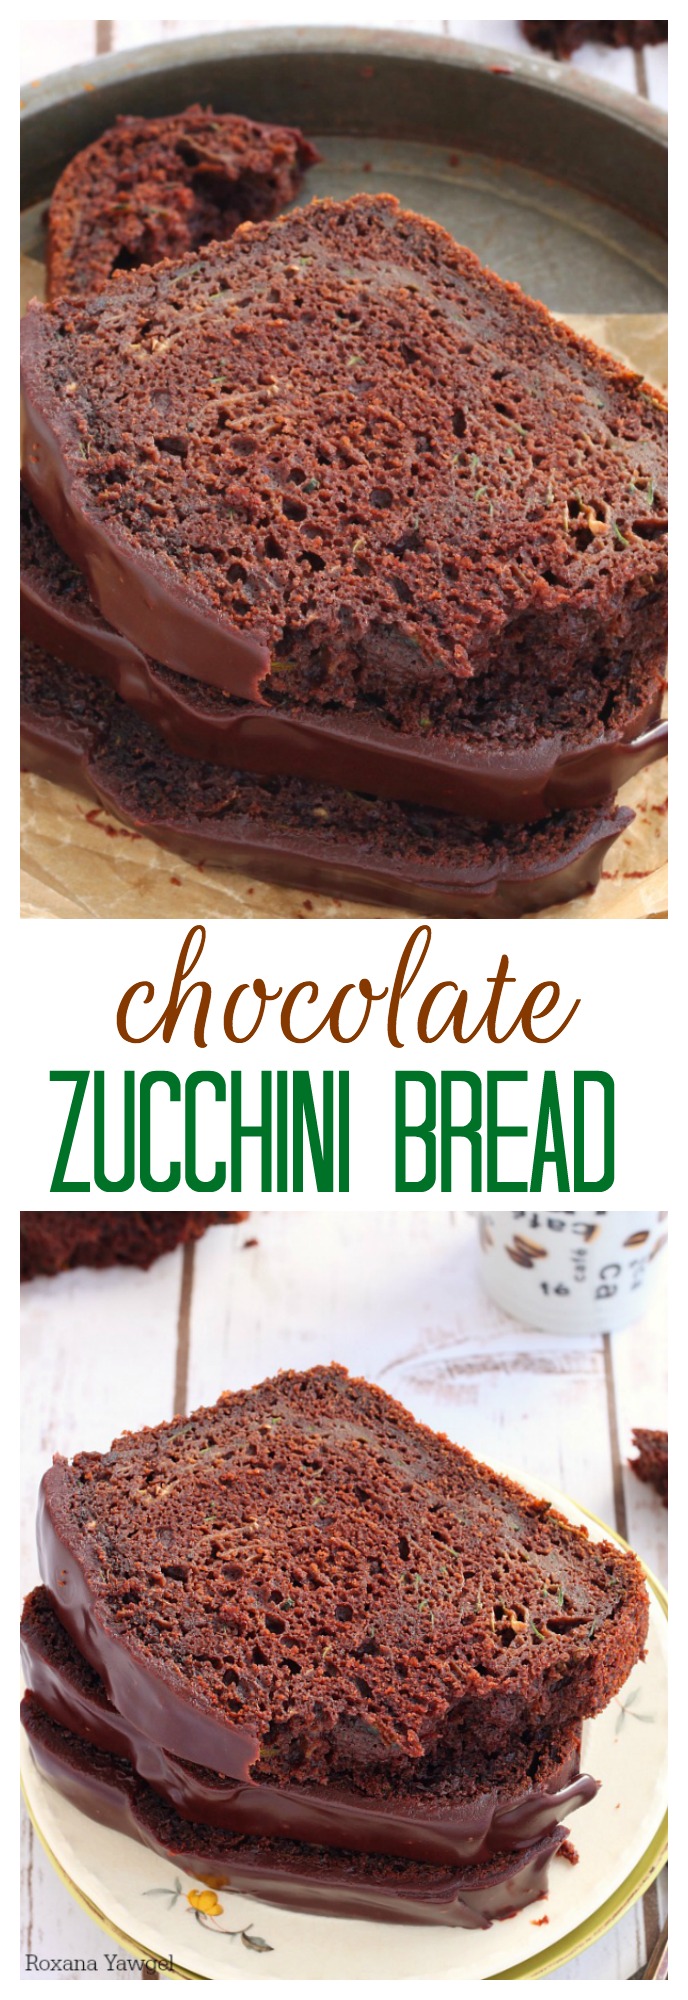 Specks of zucchini and a double dose of chocolate make this chocolate zucchini bread a favorite treat when you're looking for a chocolate fix without feeling too guilty.